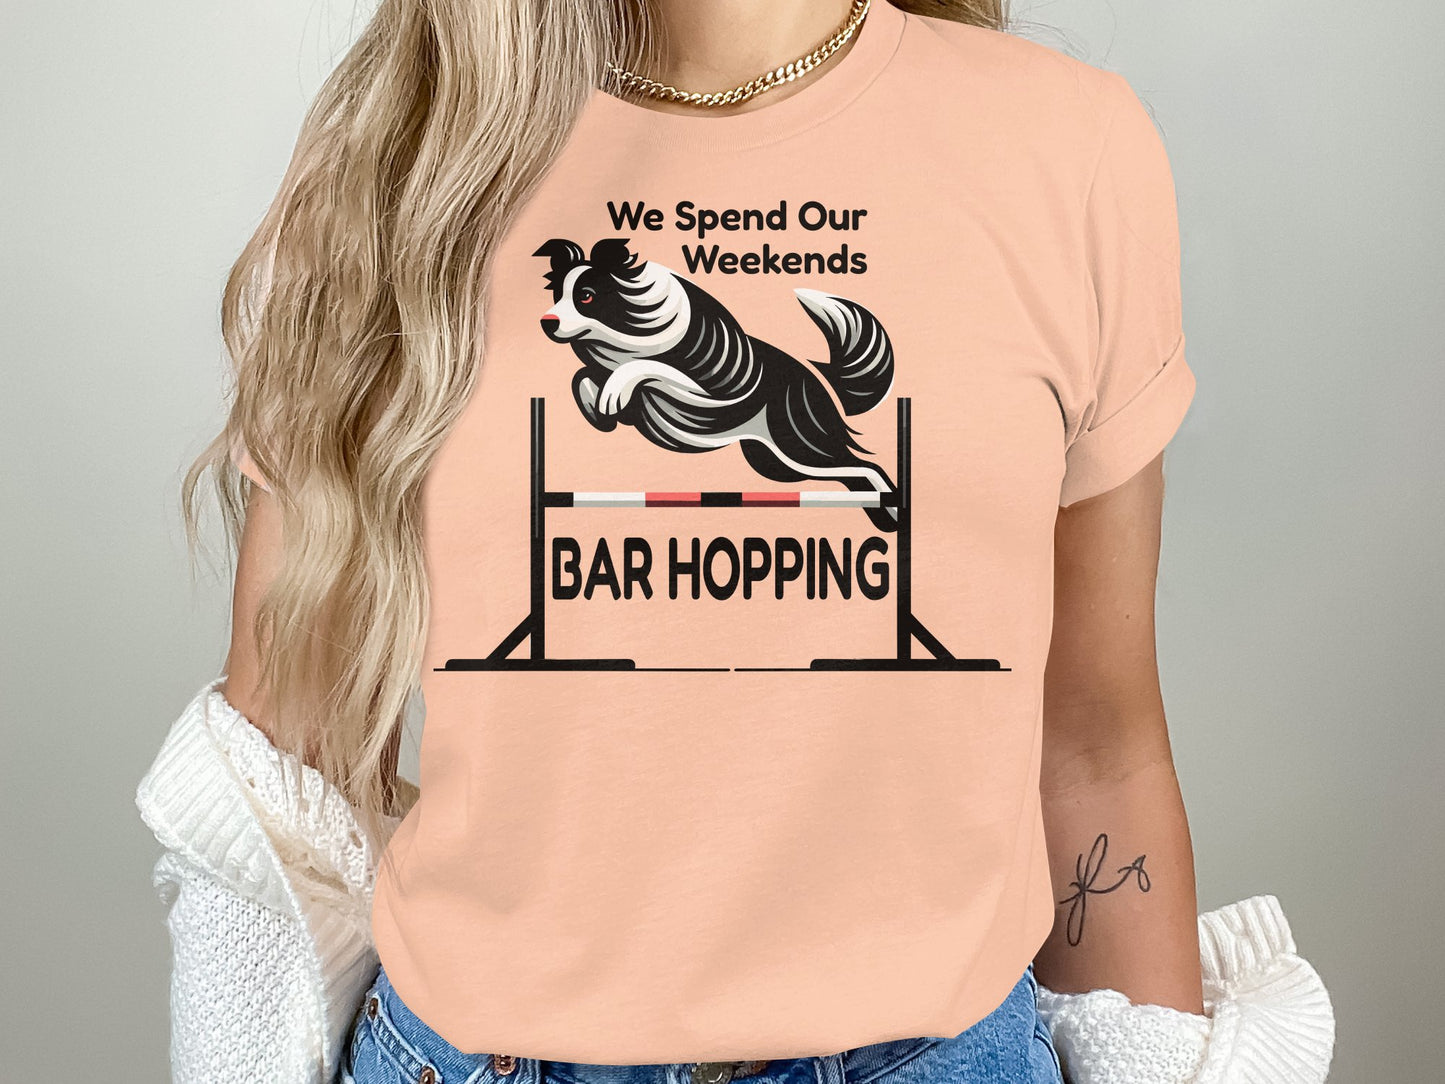 Dog Agility T-Shirt, "We Spend Our Weekends Bar Hopping"